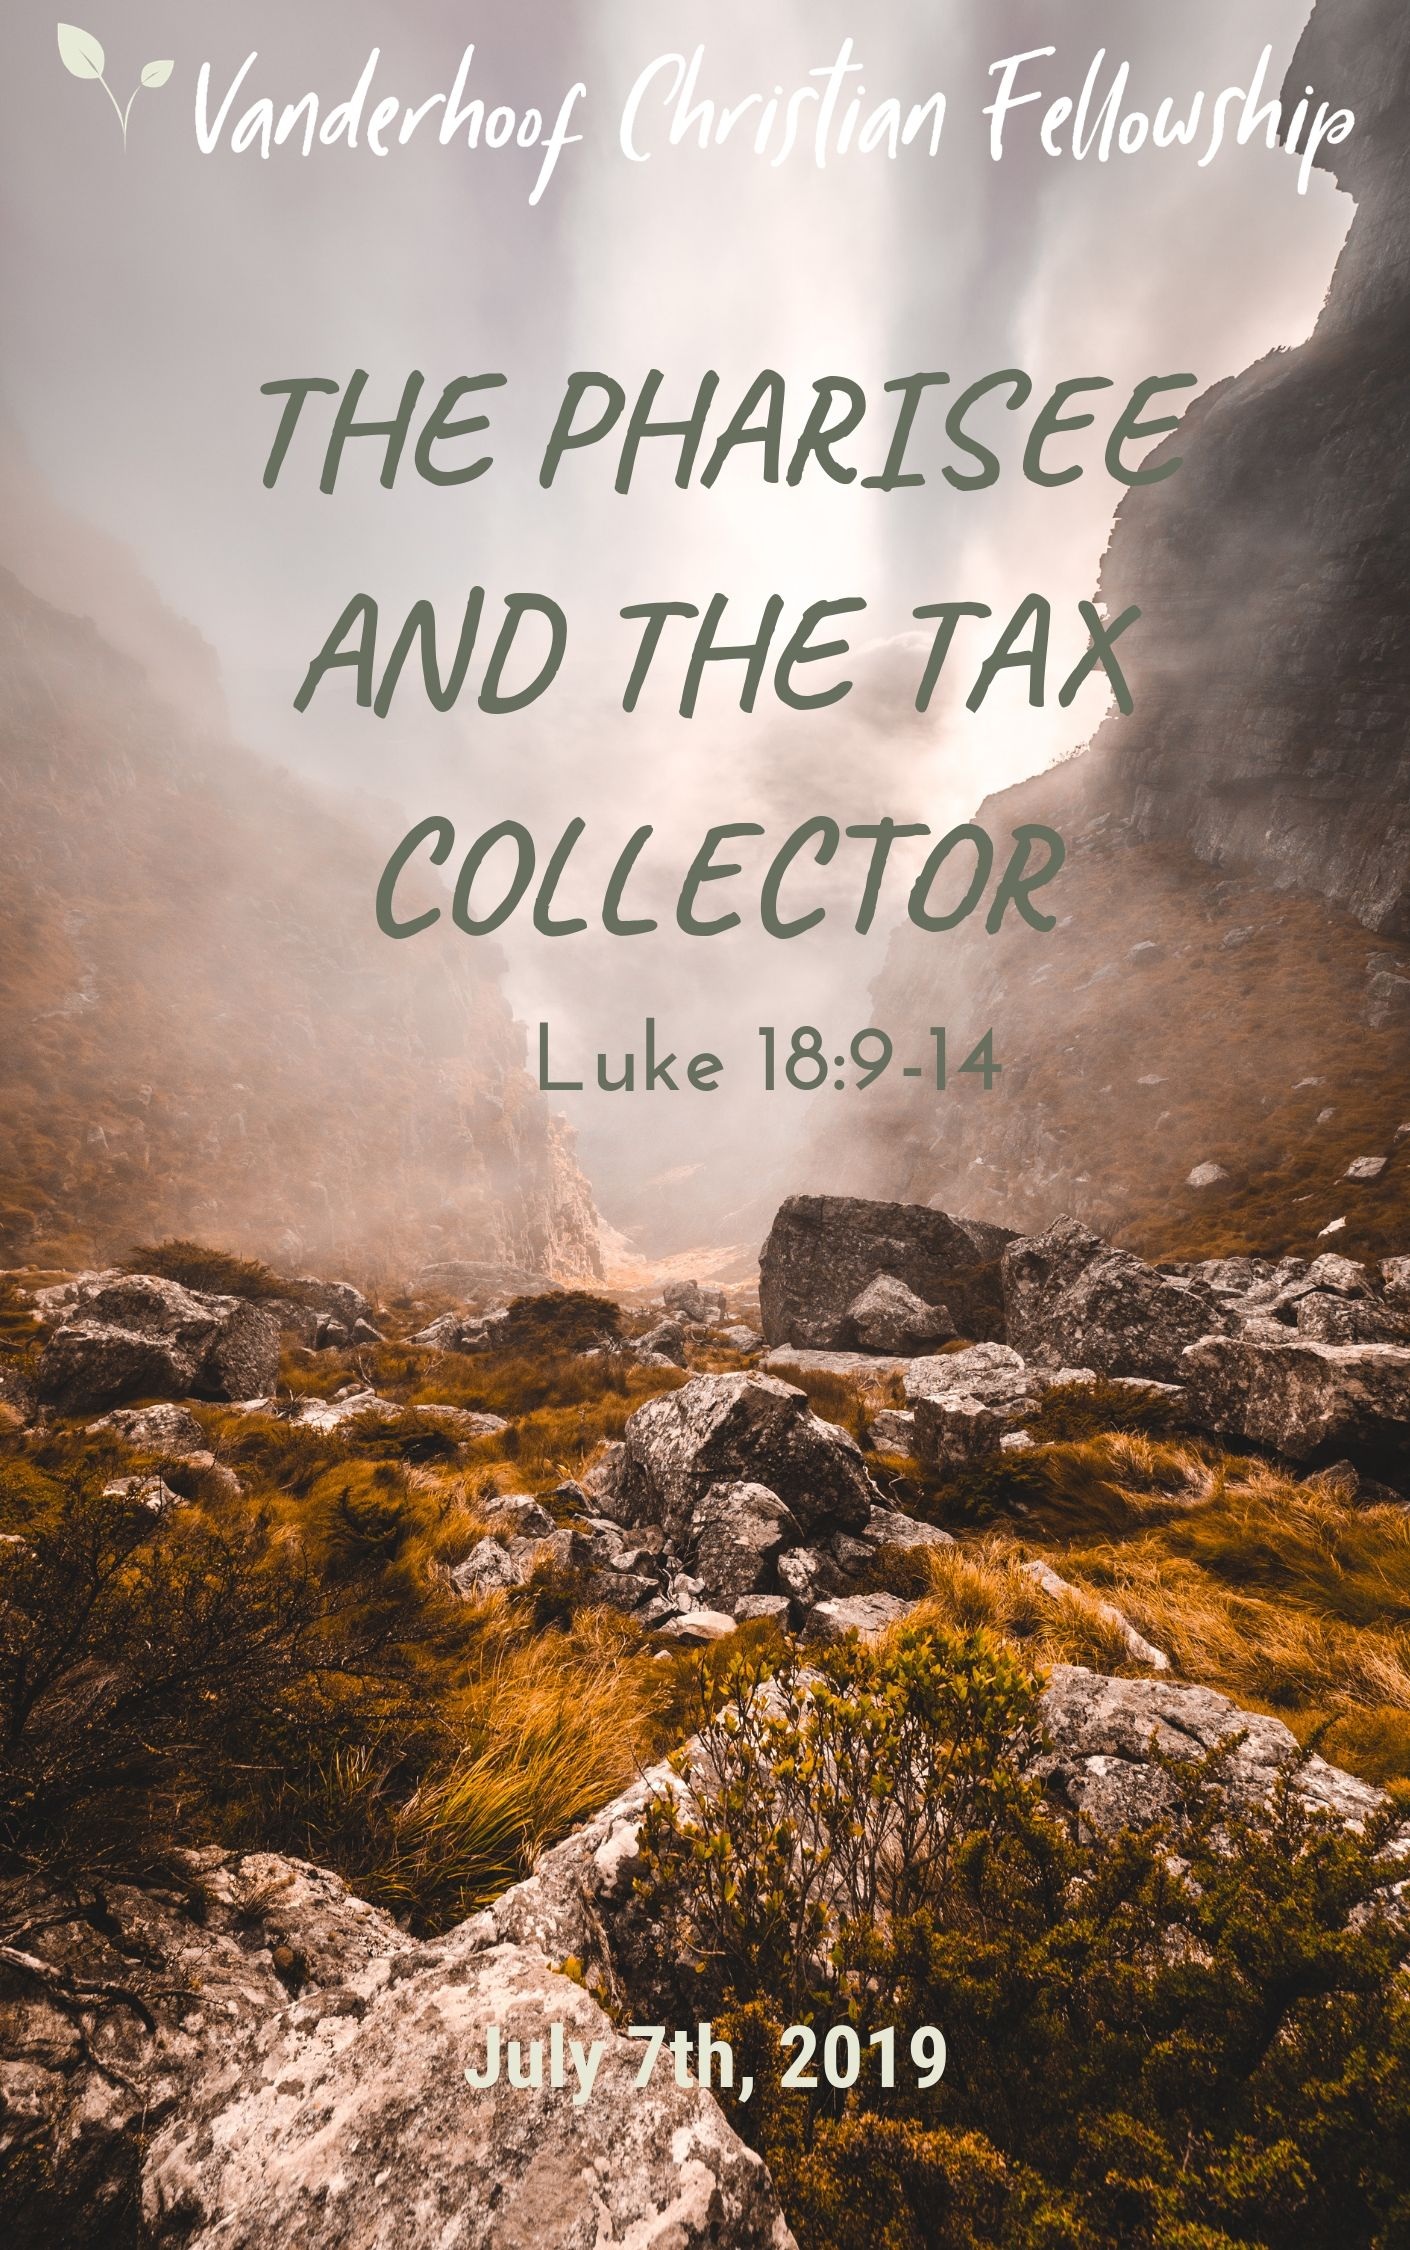 The Pharisee and the Tax Collector*